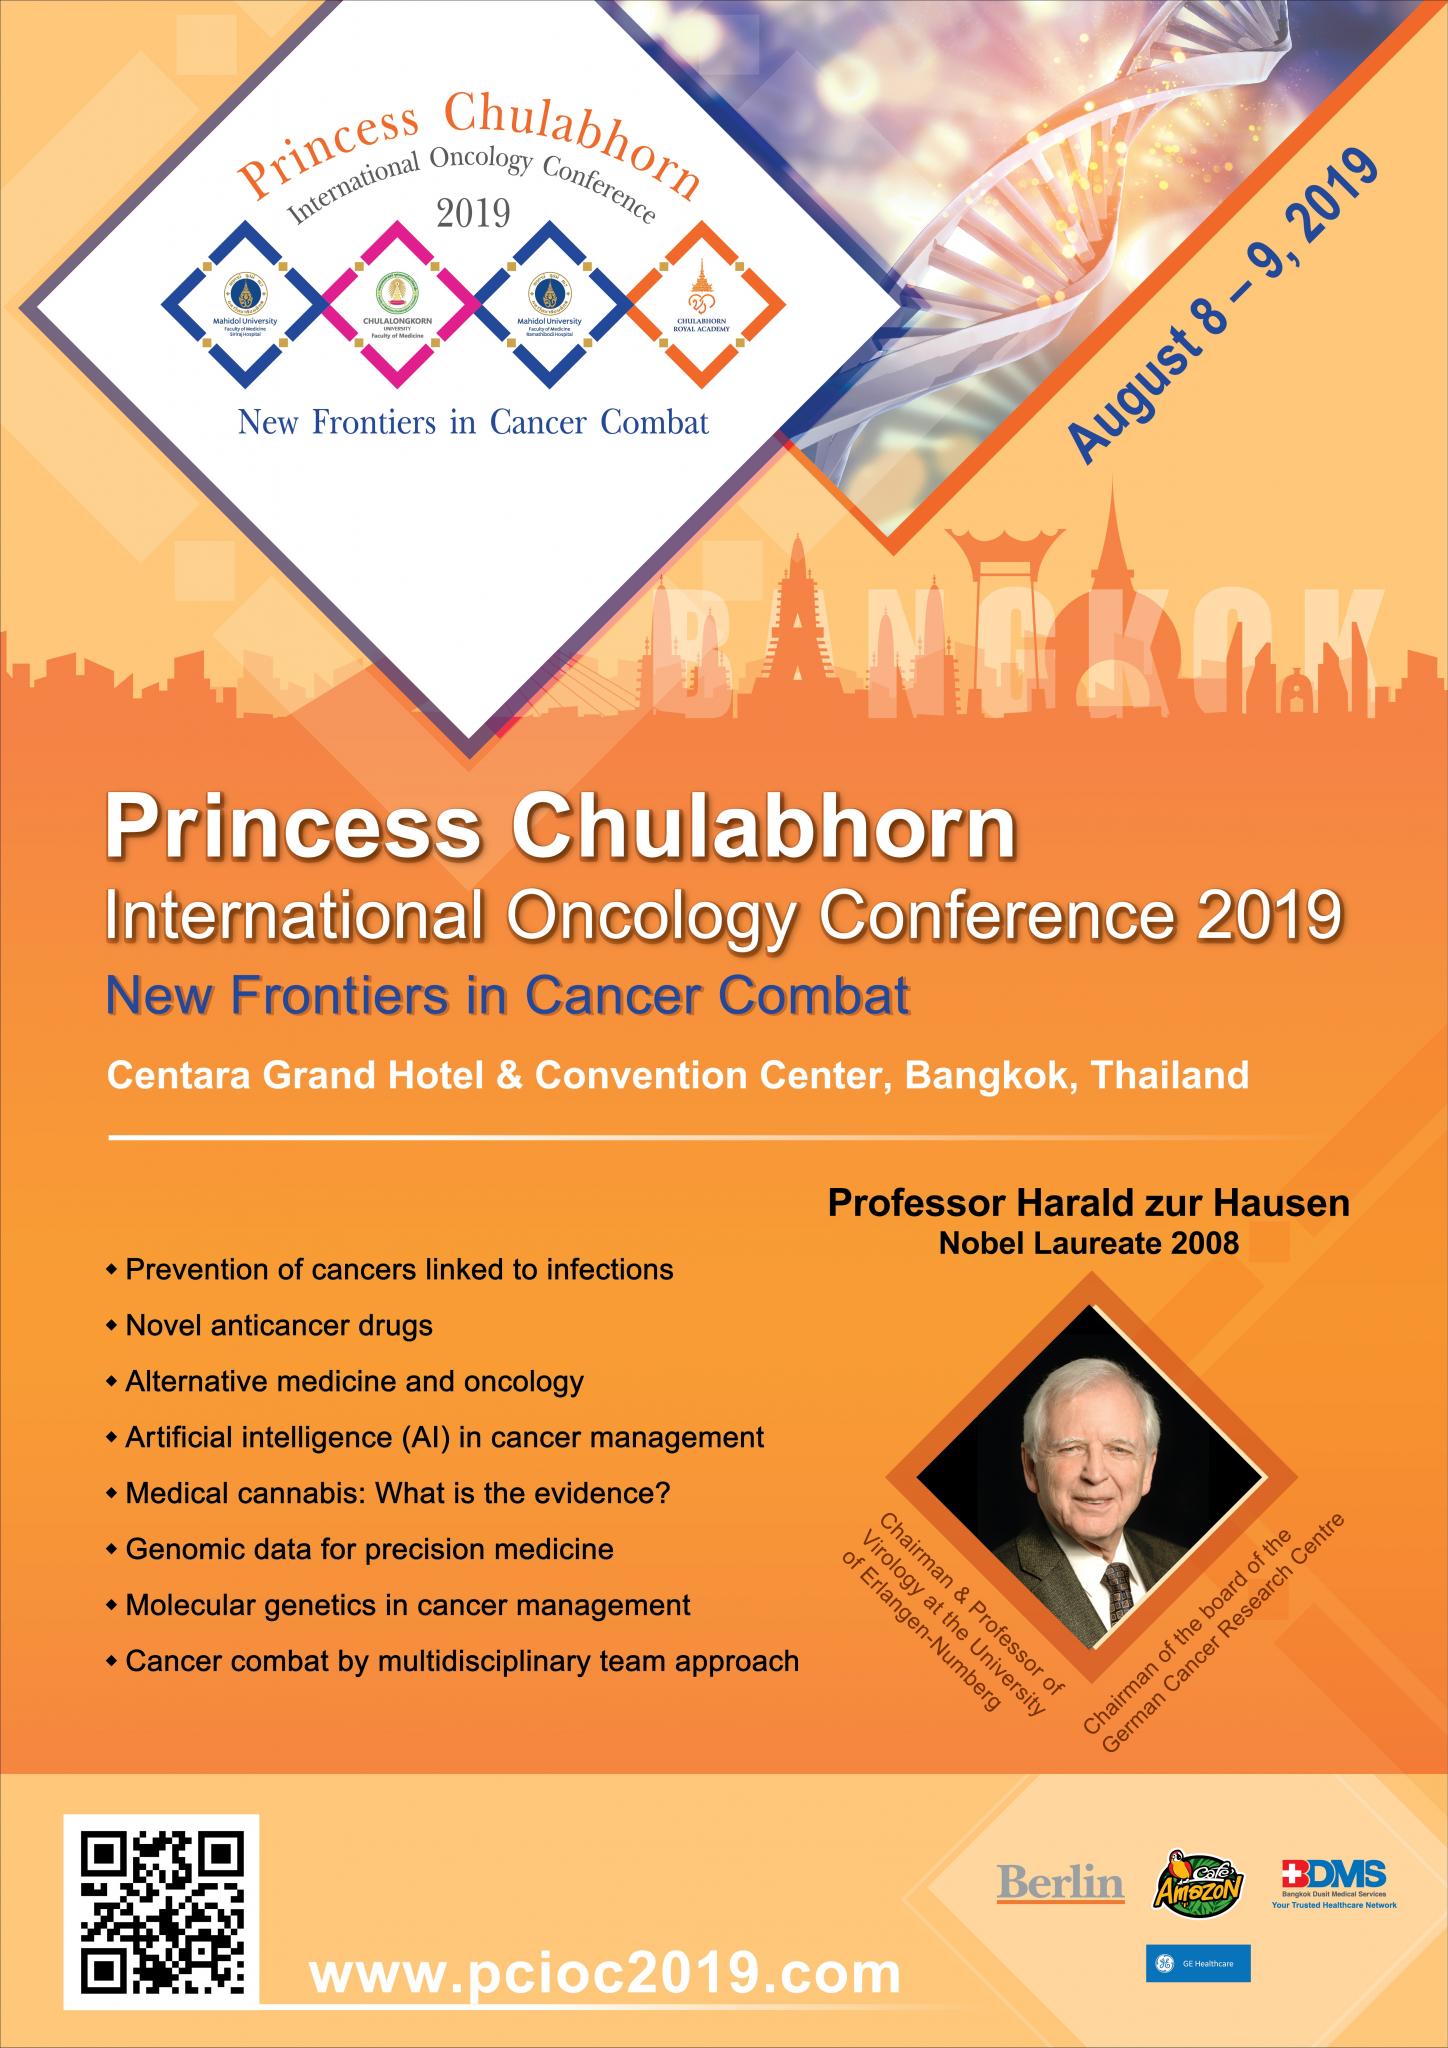 Princess Chulabhorn International Oncology Conference 2019 New Frontiers in Cancer Combat